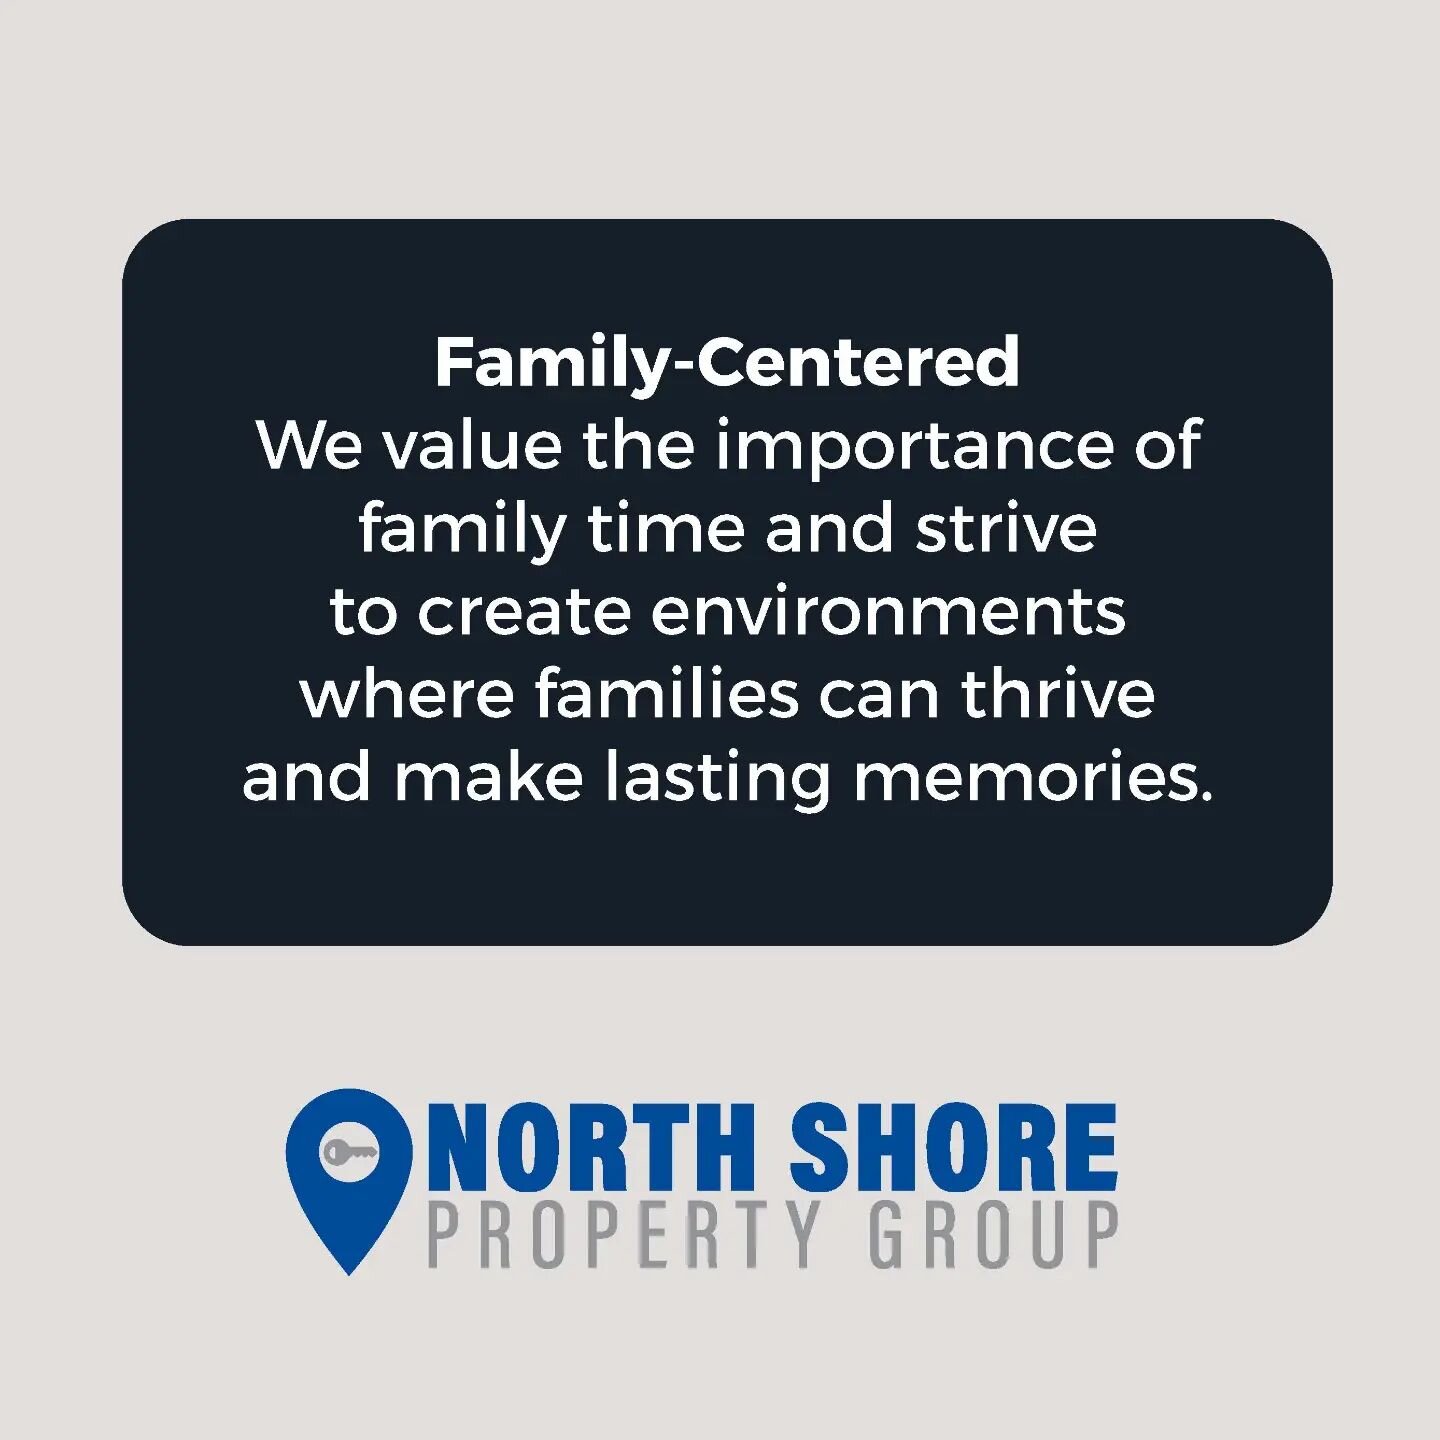 A core value of North Shore Property Group is making sure everything we do is Family-Centered. We value the importance of family time and strive to create environments where families can thrive and make lasting memories. Happy Holidays everyone!

#Re